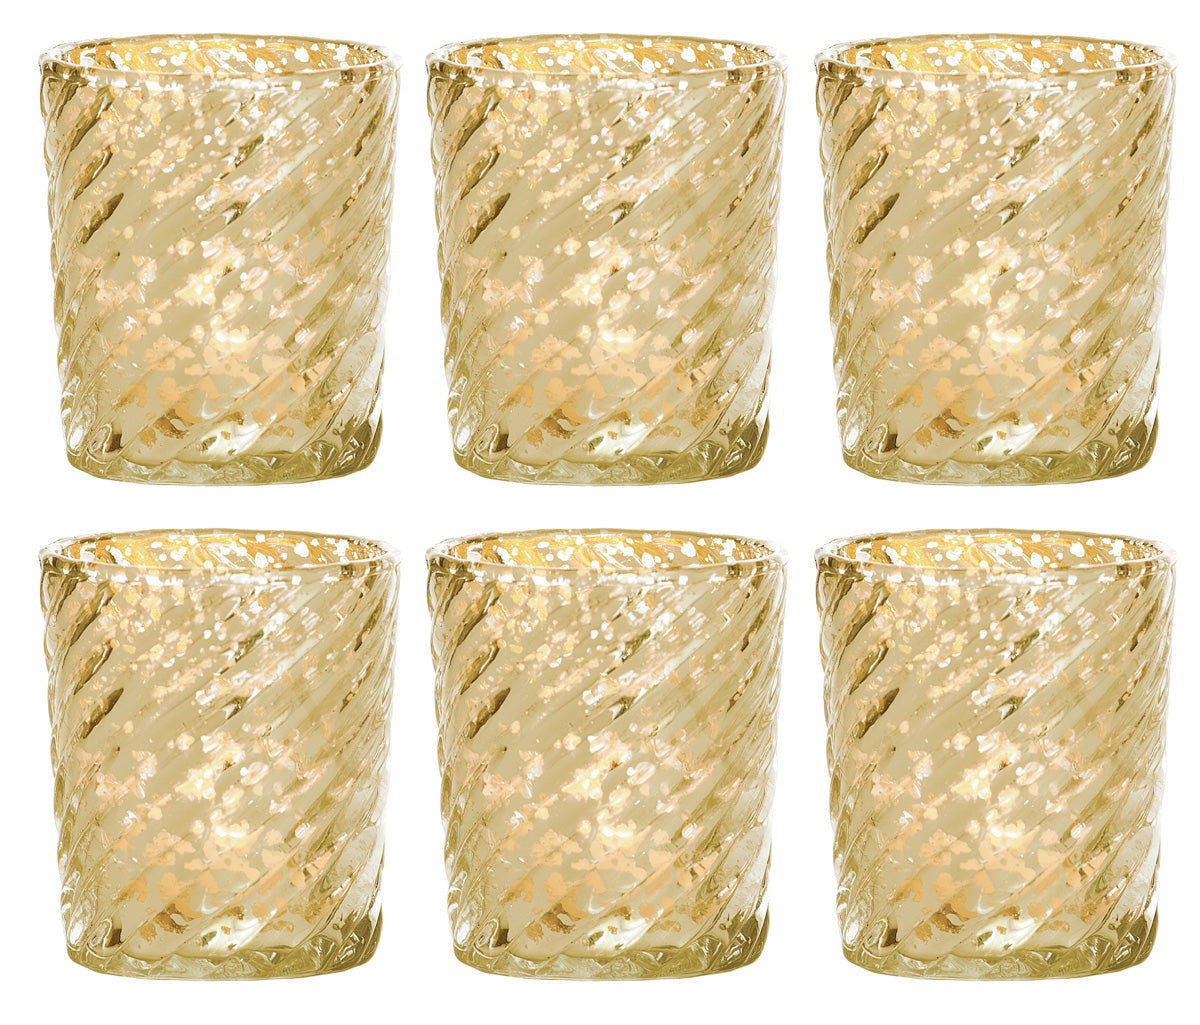 6 Pack | Mercury Glass Candle Holder (3-Inch, Grace Design, Gold) - for use with Tea Lights - for Home Décor, Parties and Wedding Decorations - PaperLanternStore.com - Paper Lanterns, Decor, Party Lights &amp; More